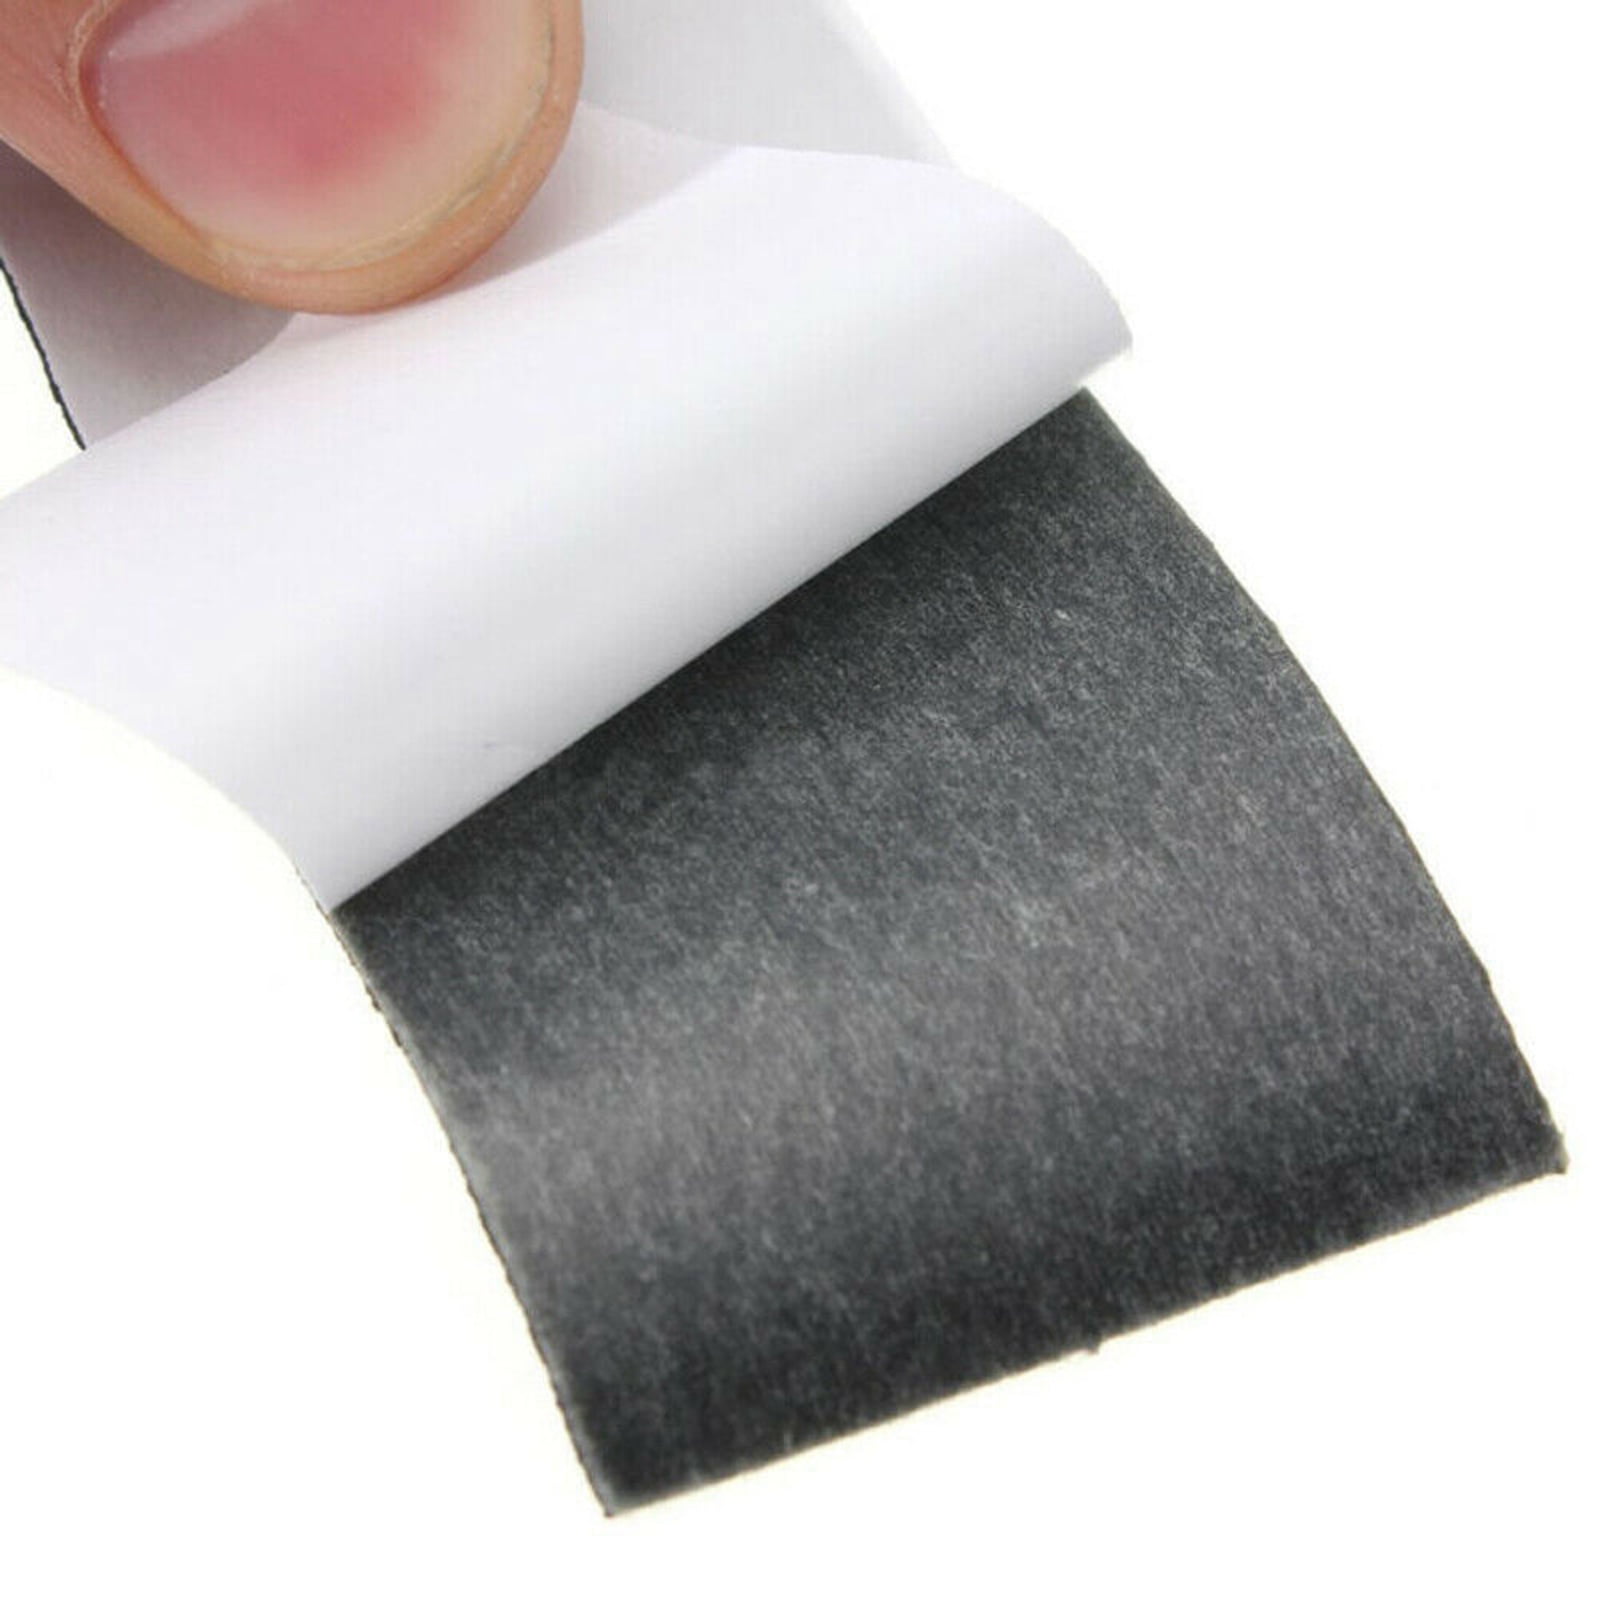 12x Black Foam Grip Tape Self-adhesive Stickers-110x35mm for Wooden Fingerboard 